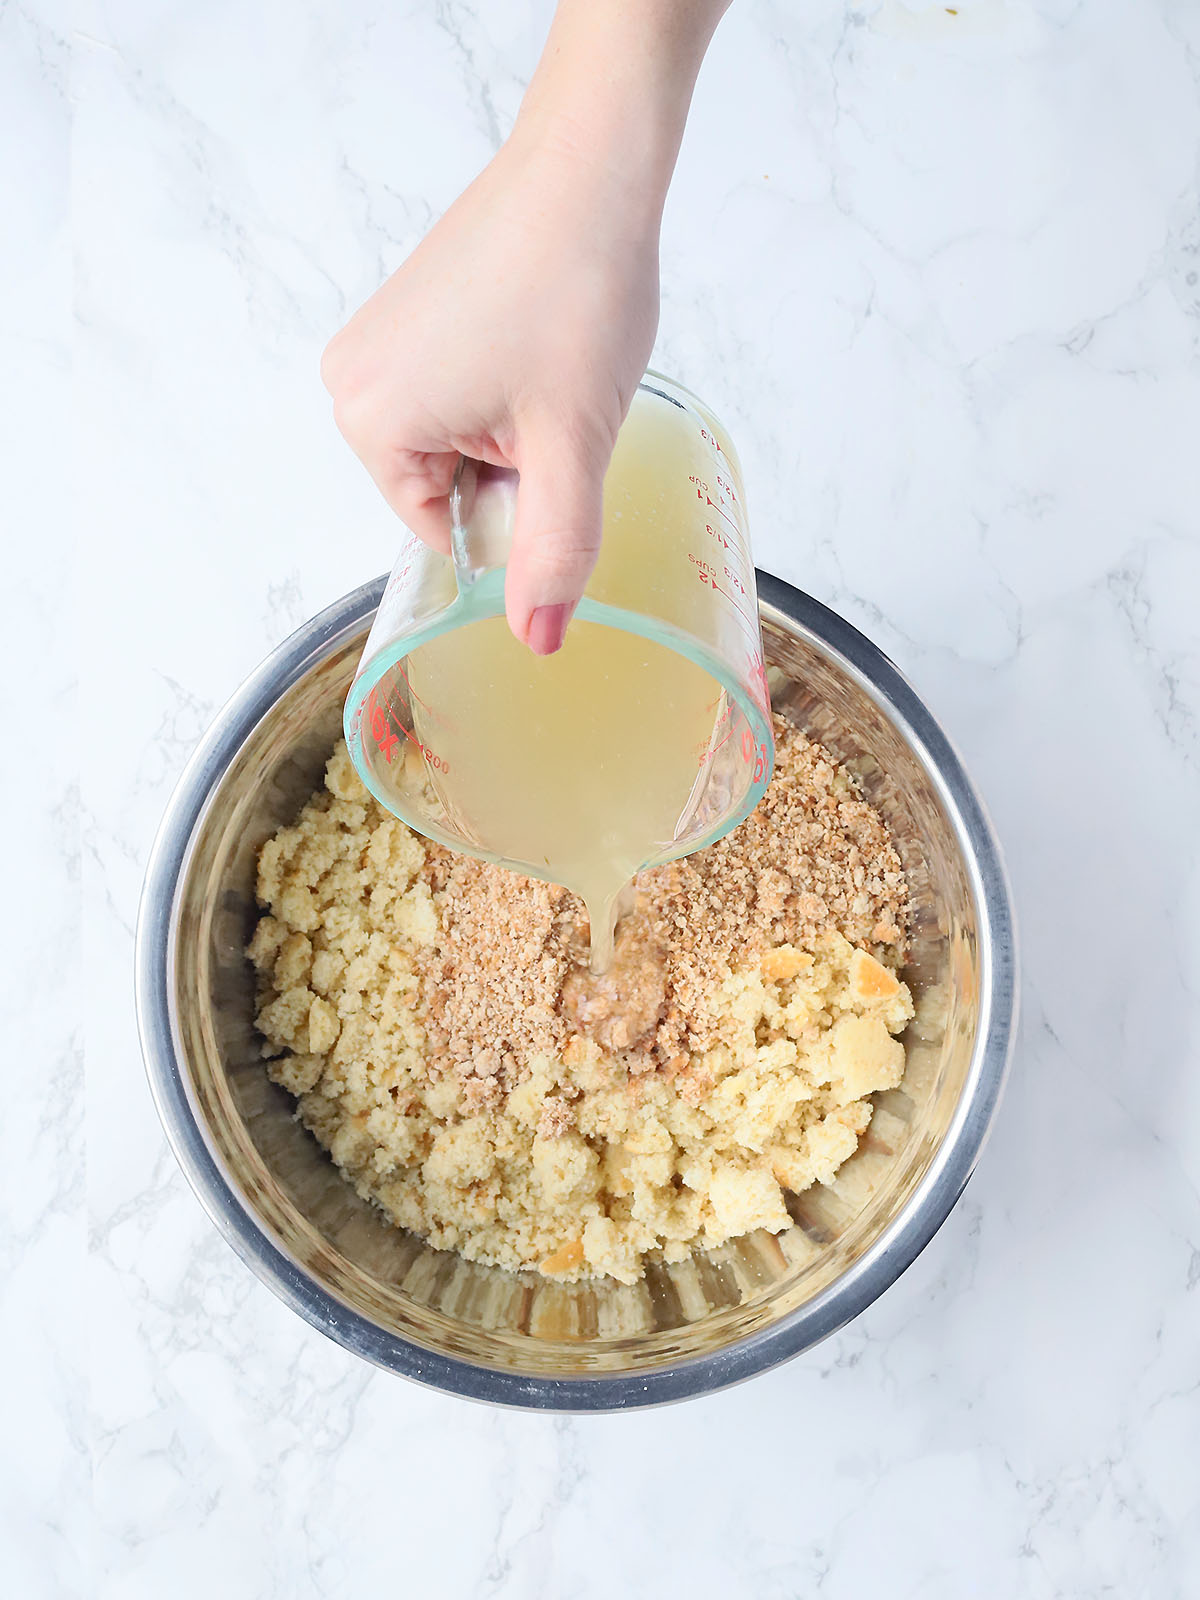 hand pouring chicken broth into a mixing bowl of crumbled cornbread and breadcrumbs